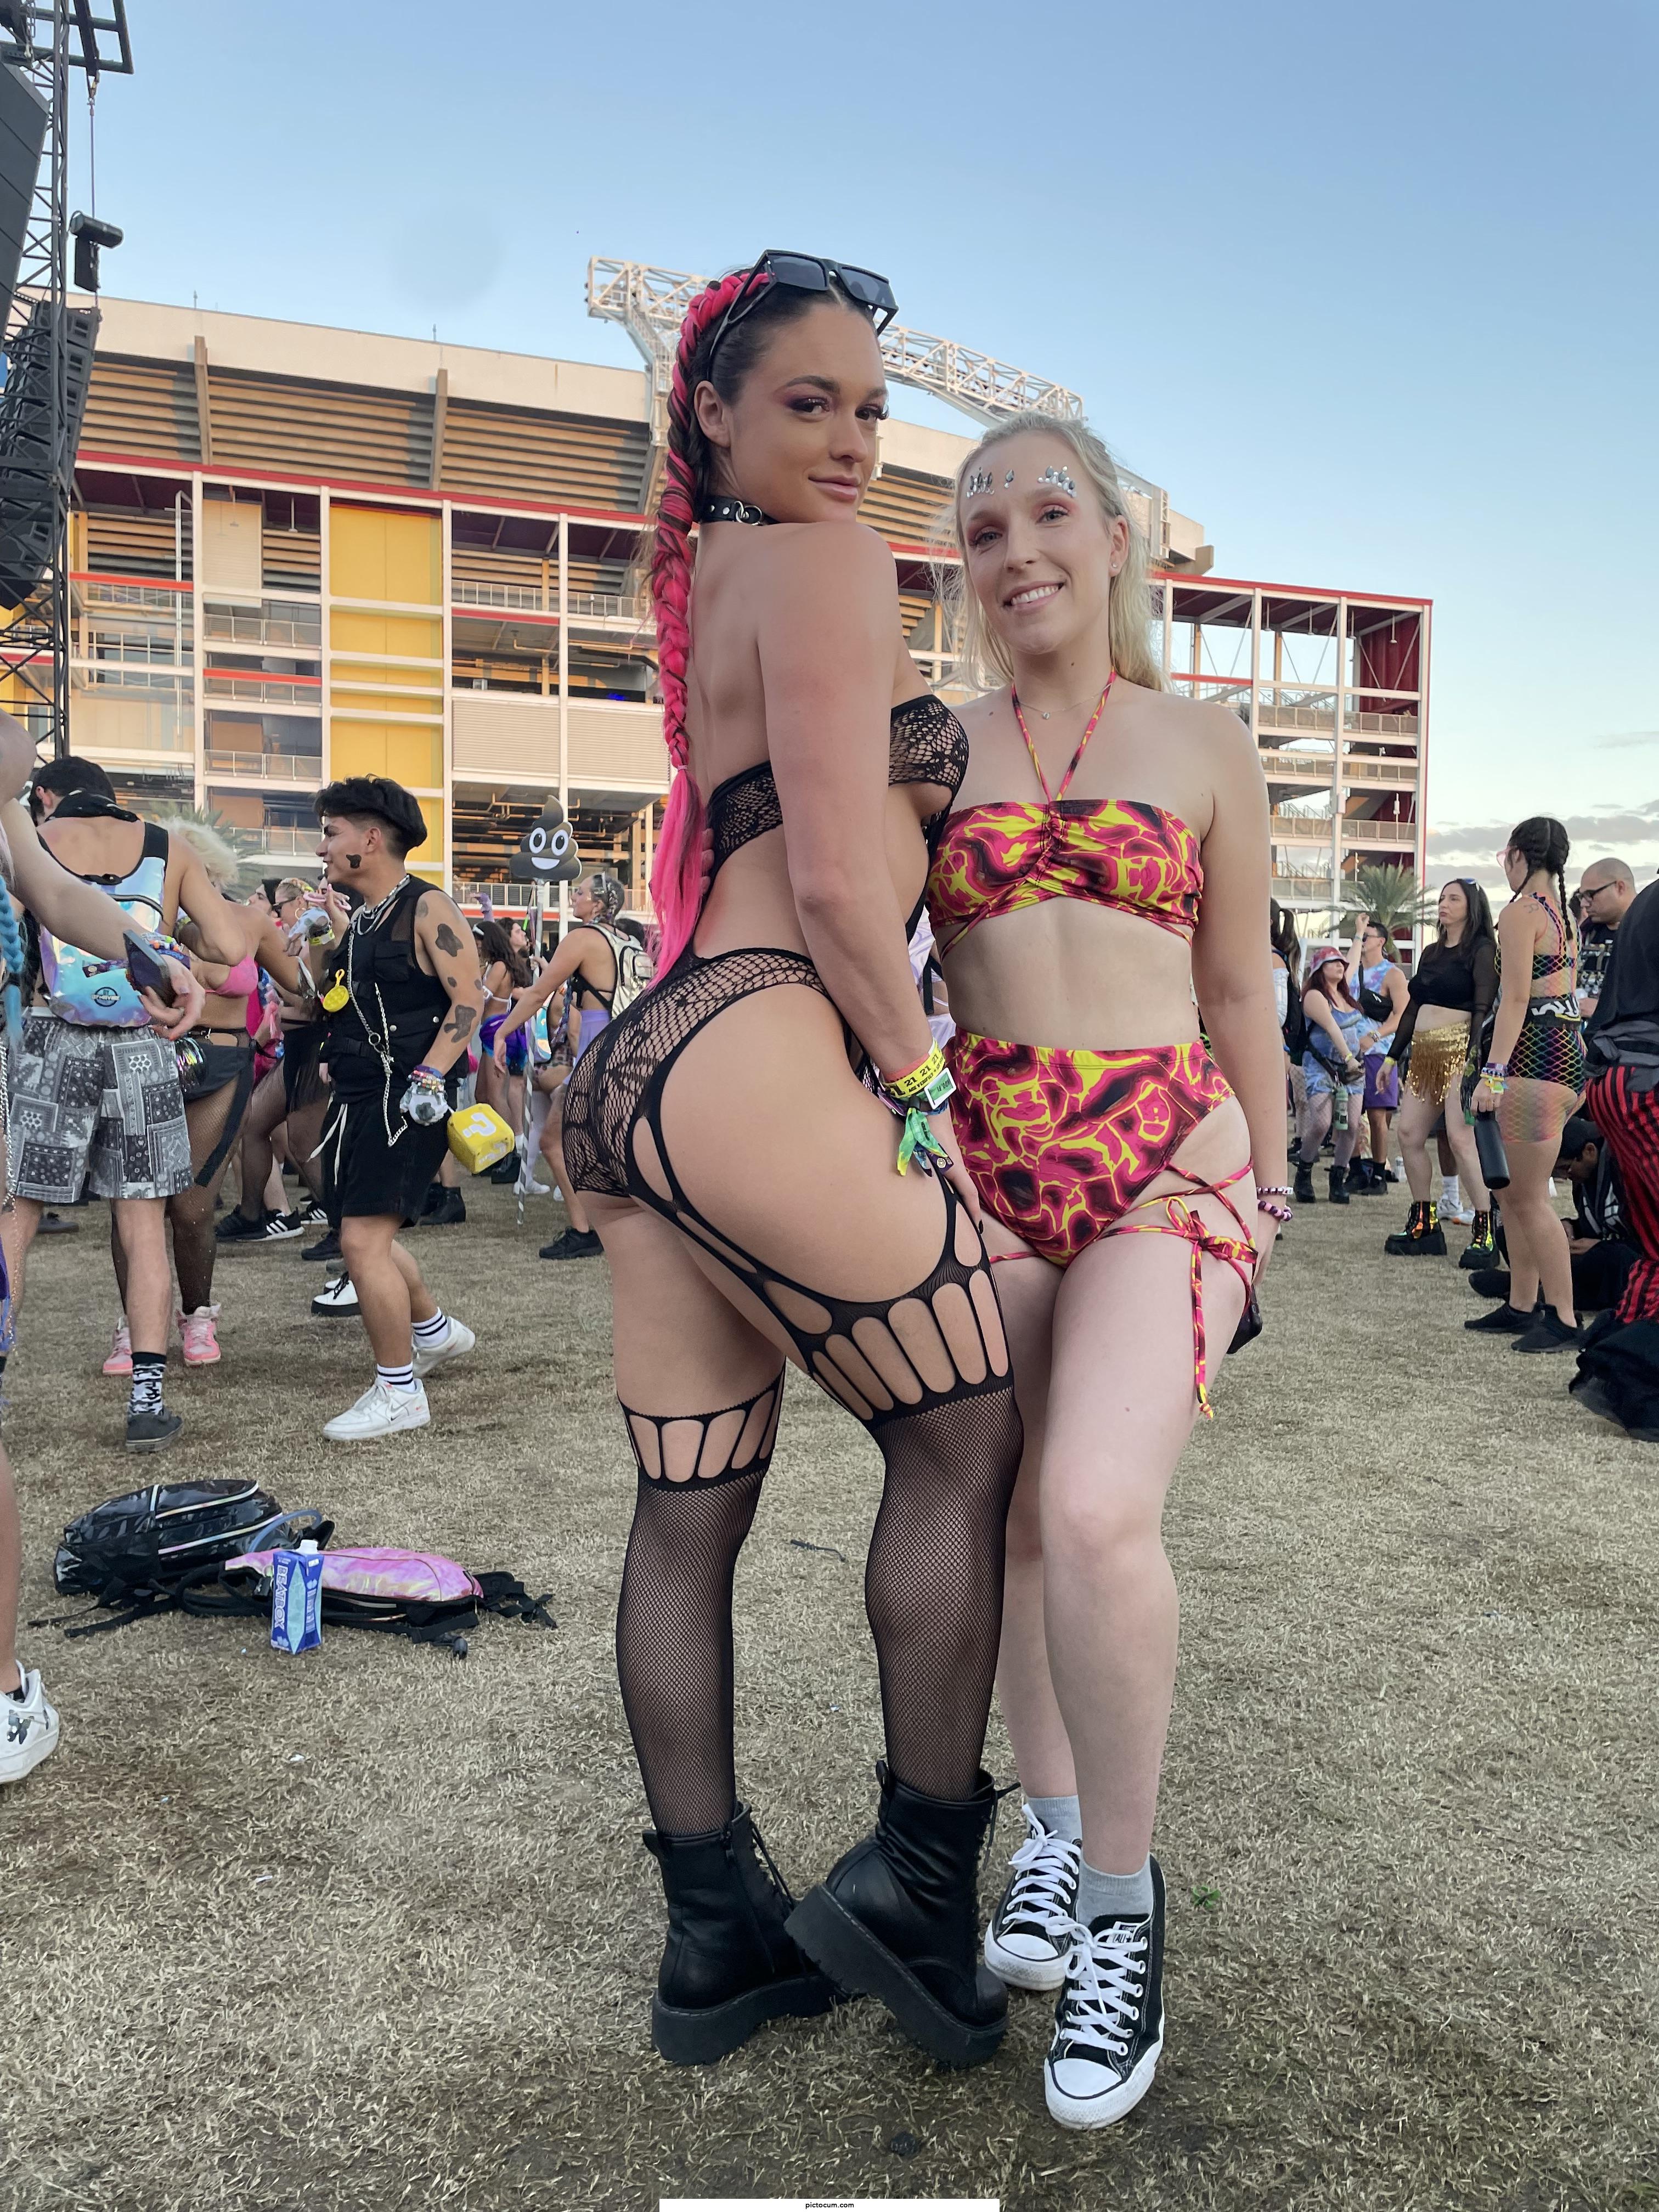 friends who rave together, ____________